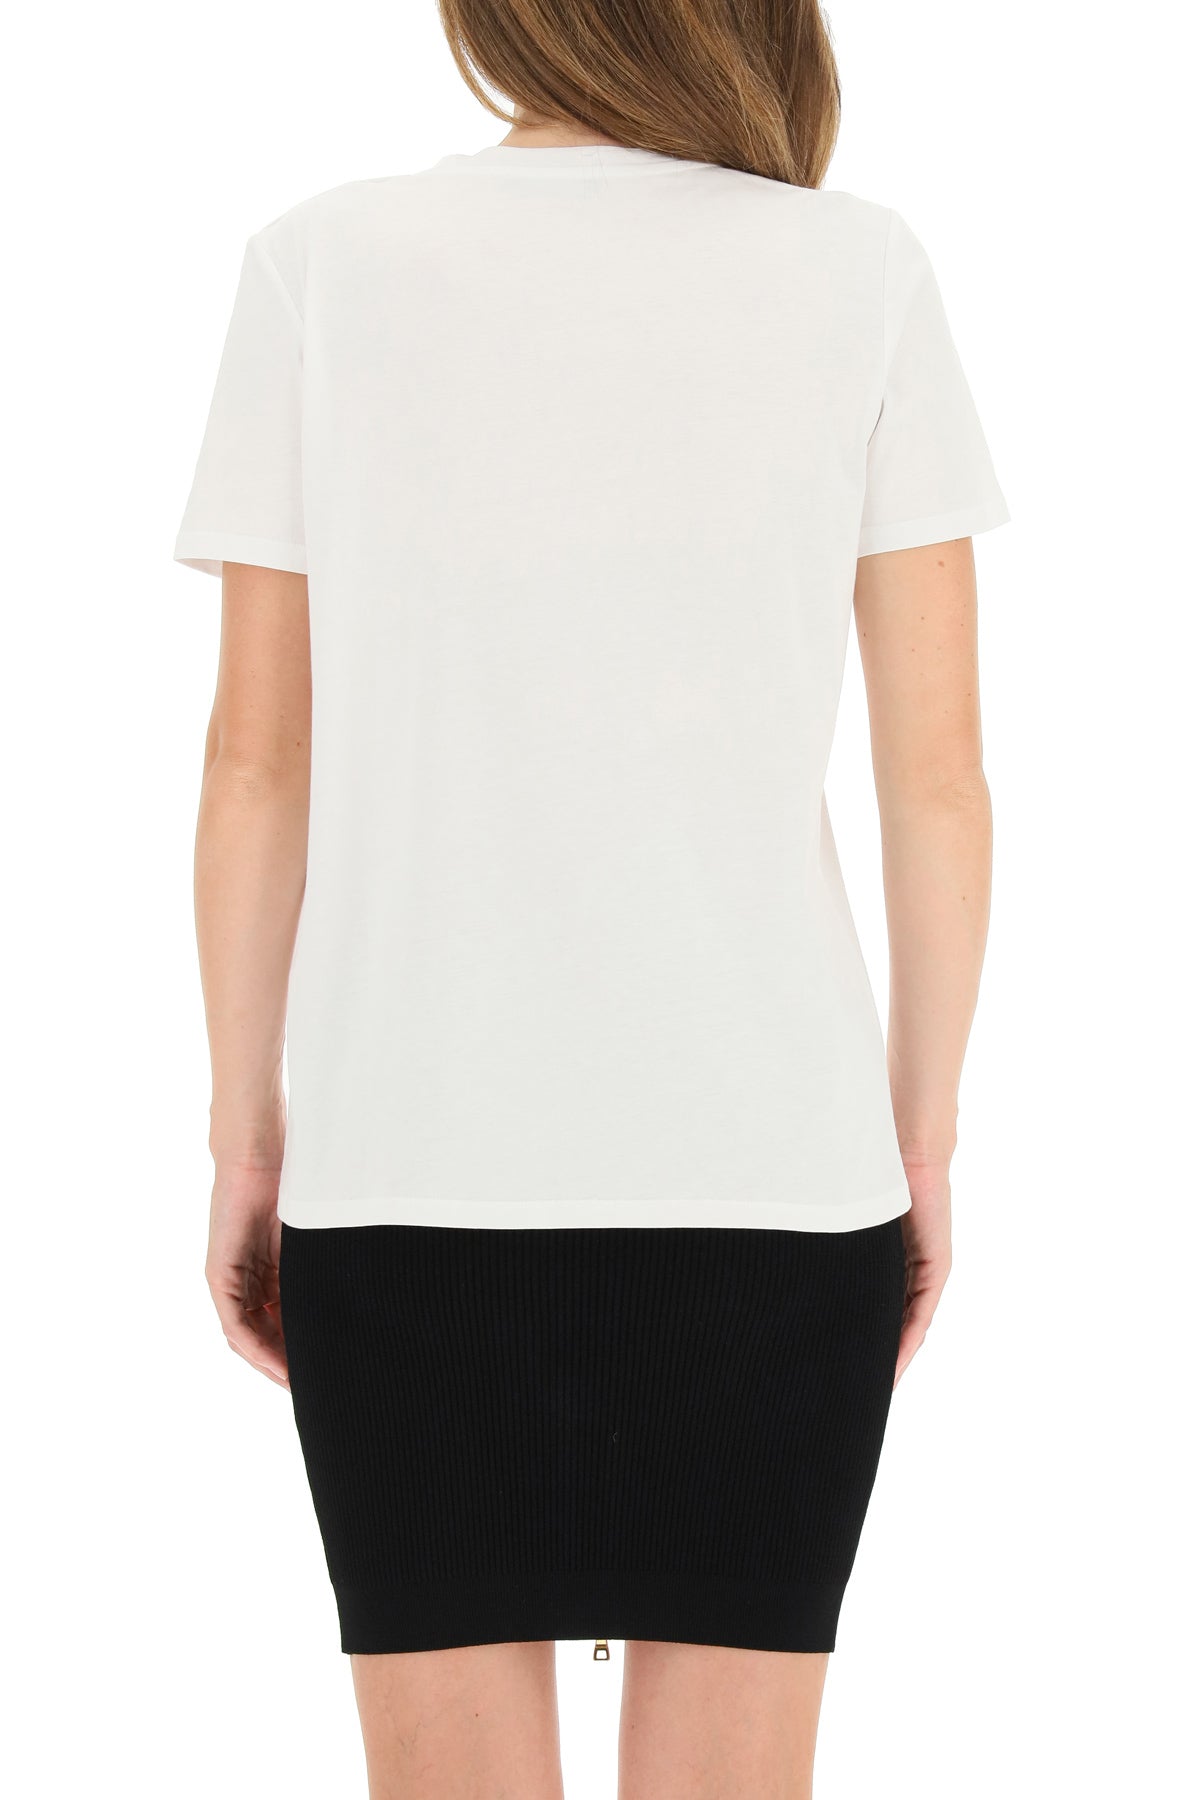 Balmain T-Shirt With Logo Print And Embossed Buttons White